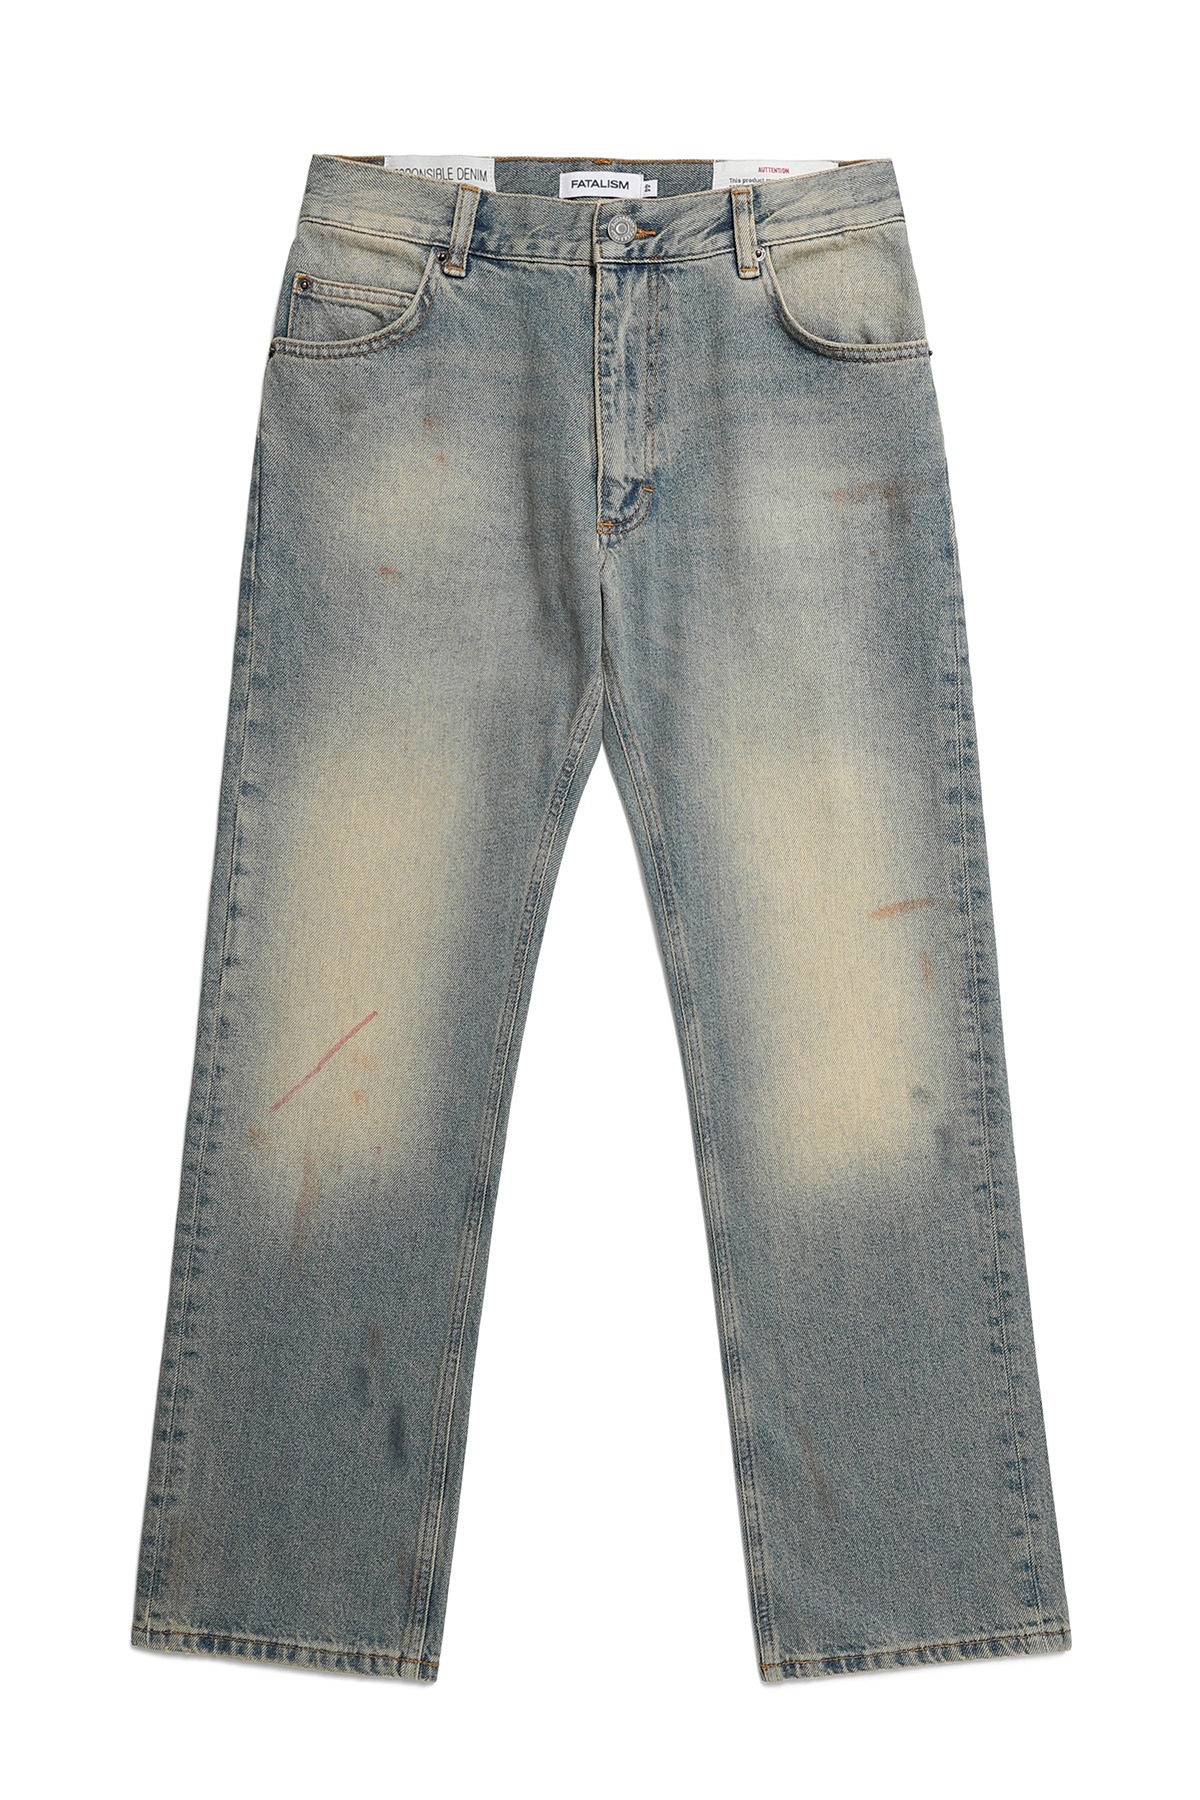 #0323 MILITARY BLUE DIRTY WASH CROP JEANS